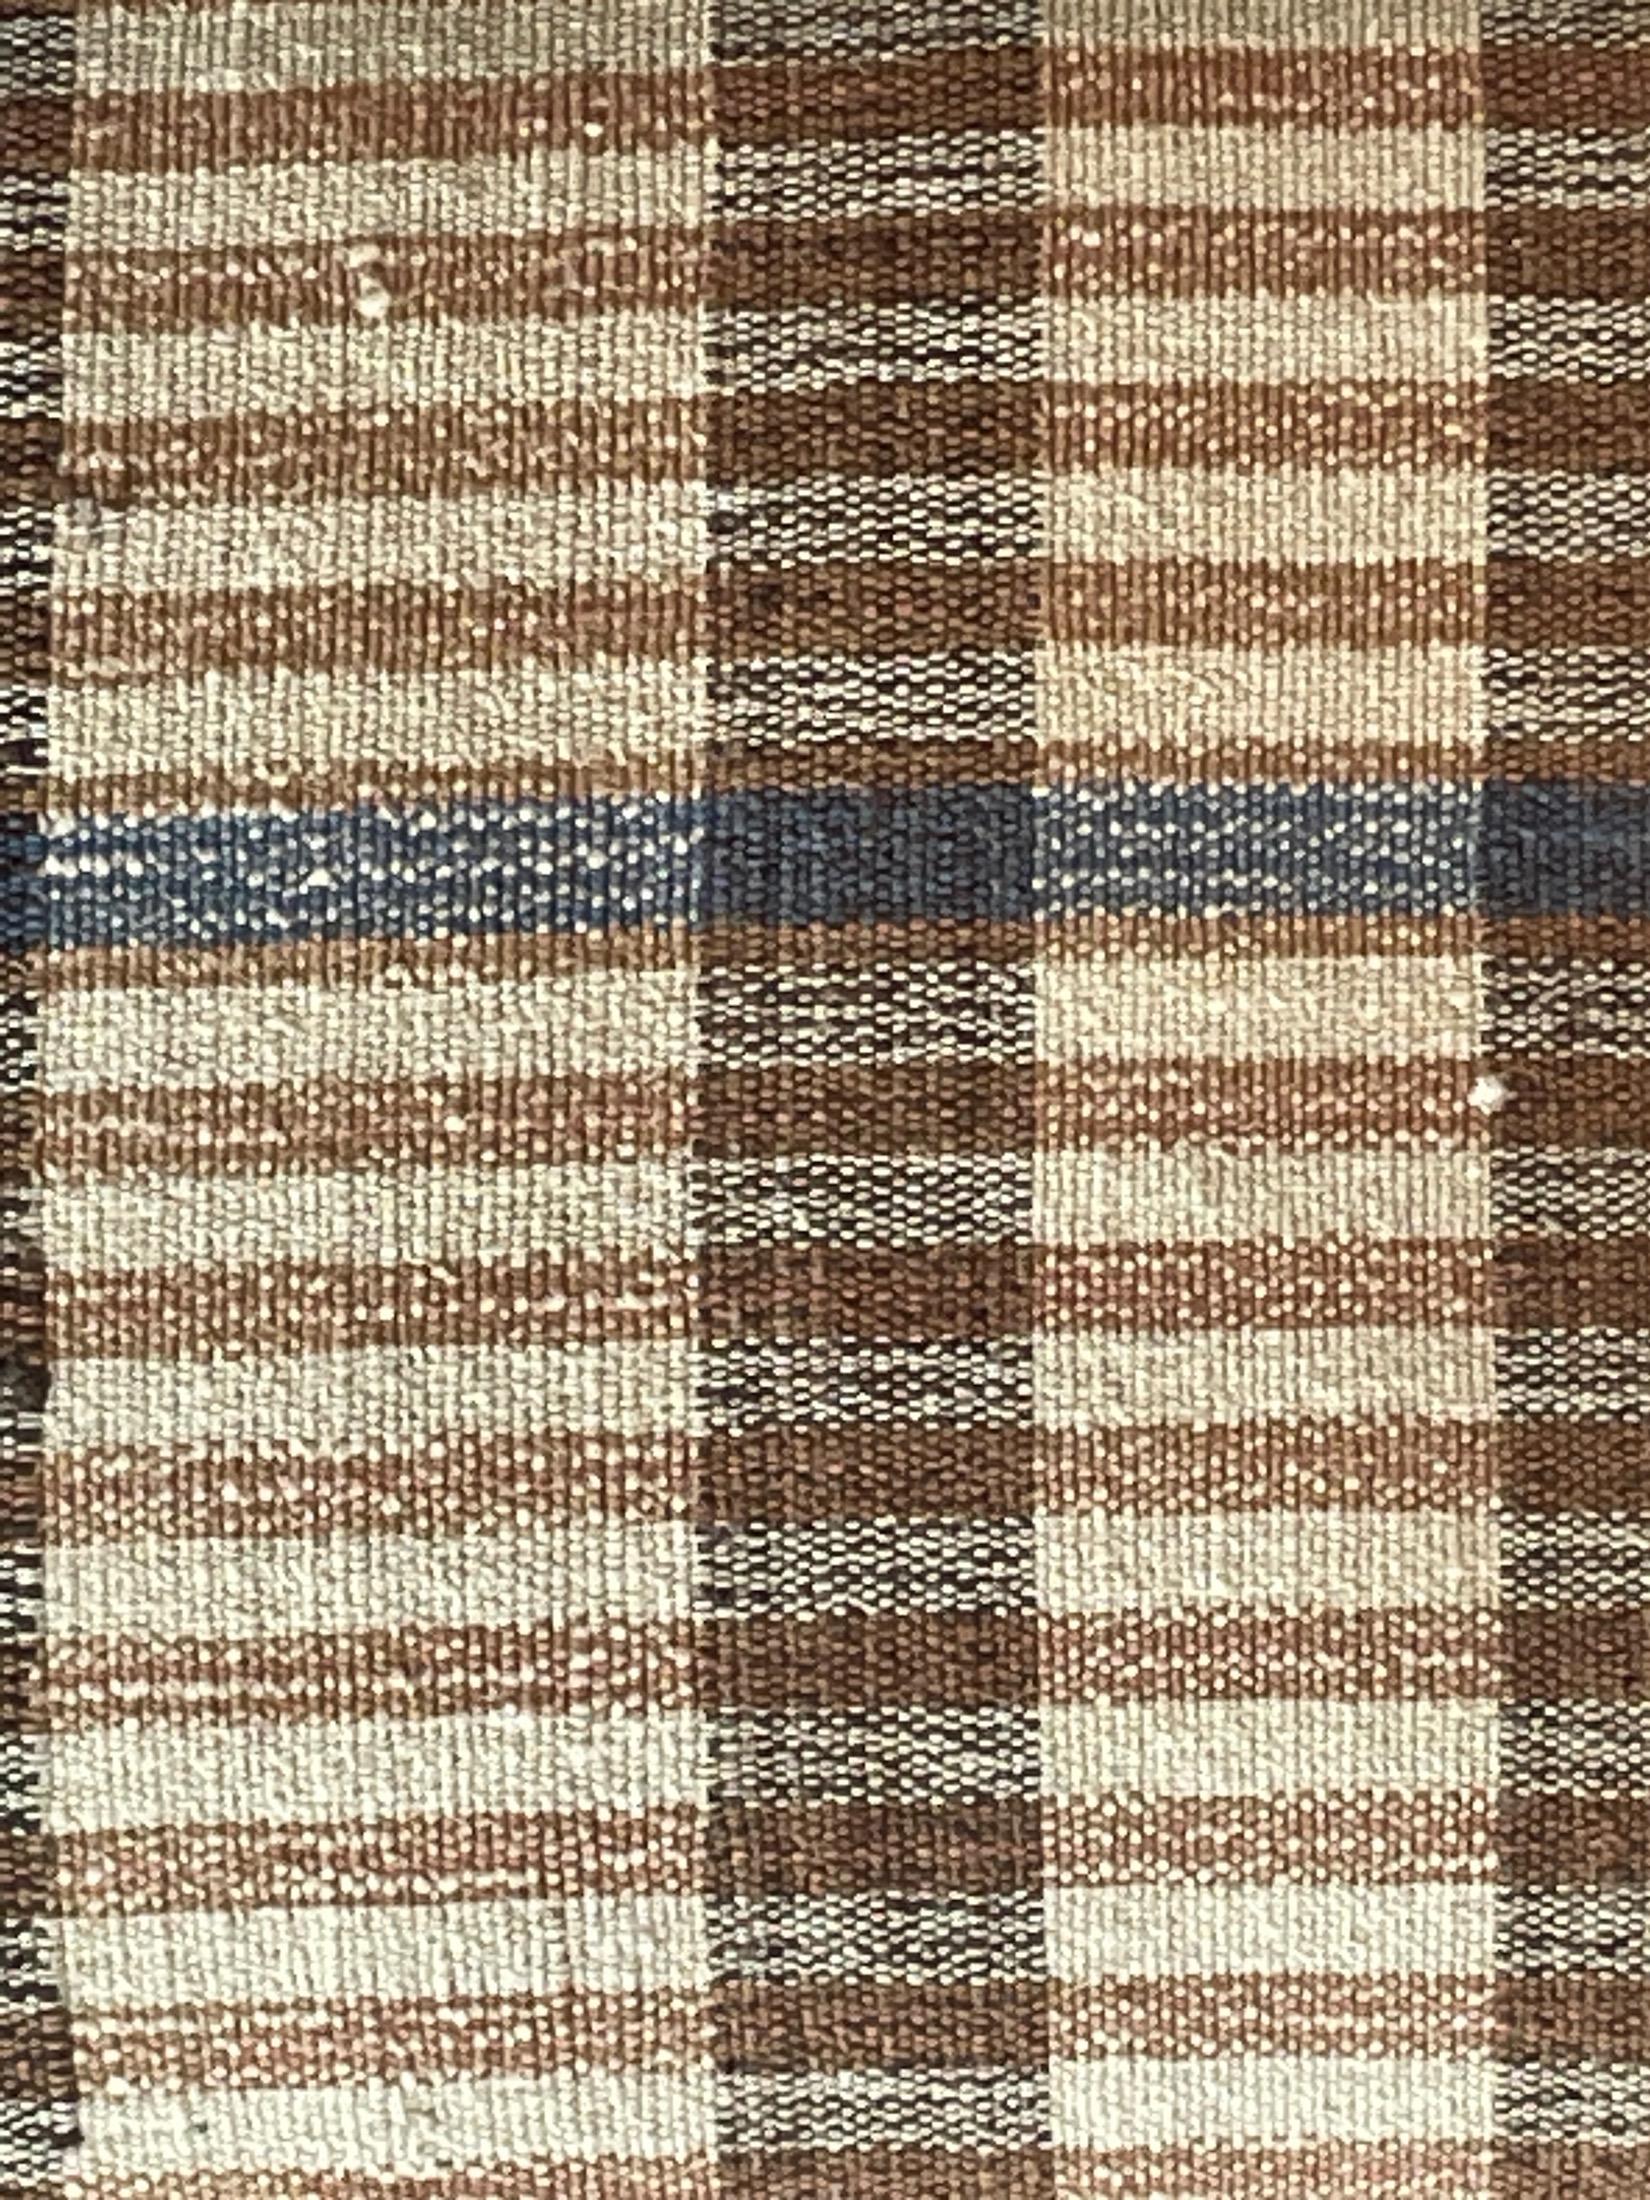 Midcentury Portuguese pillow made from handwoven fabric used originally as flour sacks.
New down and feather insert.
Brown and cream stripes with a thin blue center band.